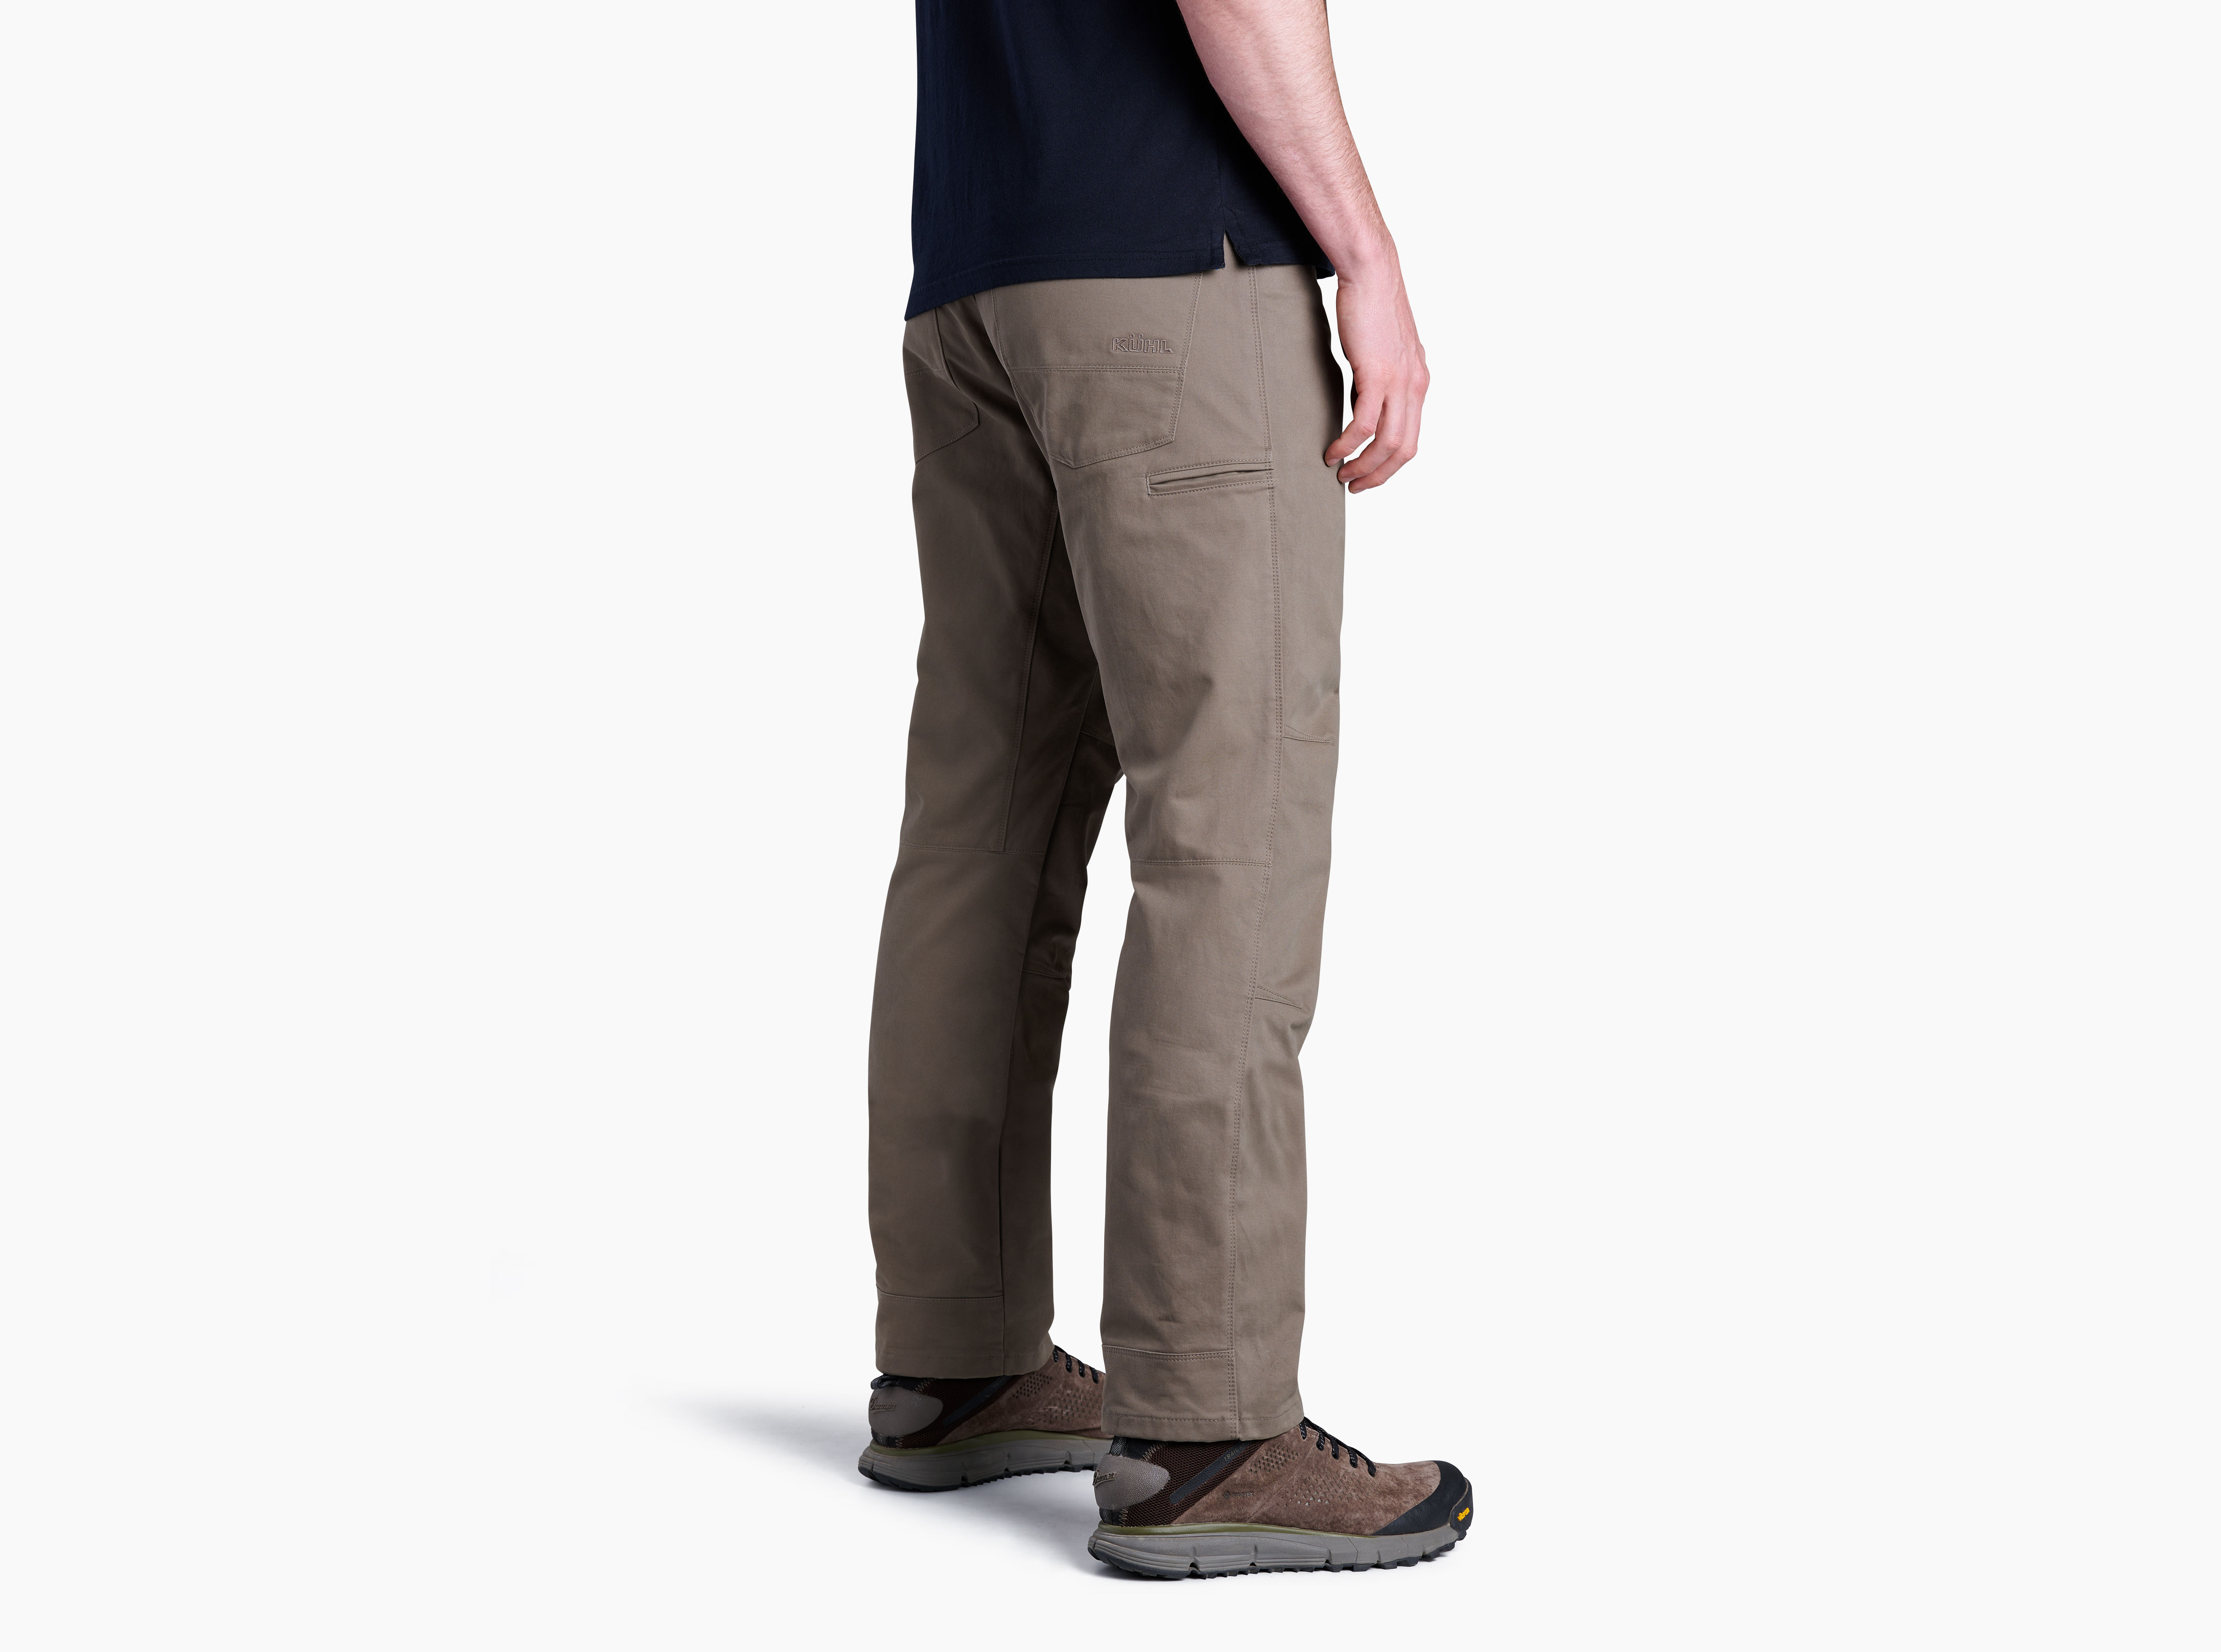 Hiking Pants < Mens And Womens Online Outlet - KÜHL < Acores-Flores